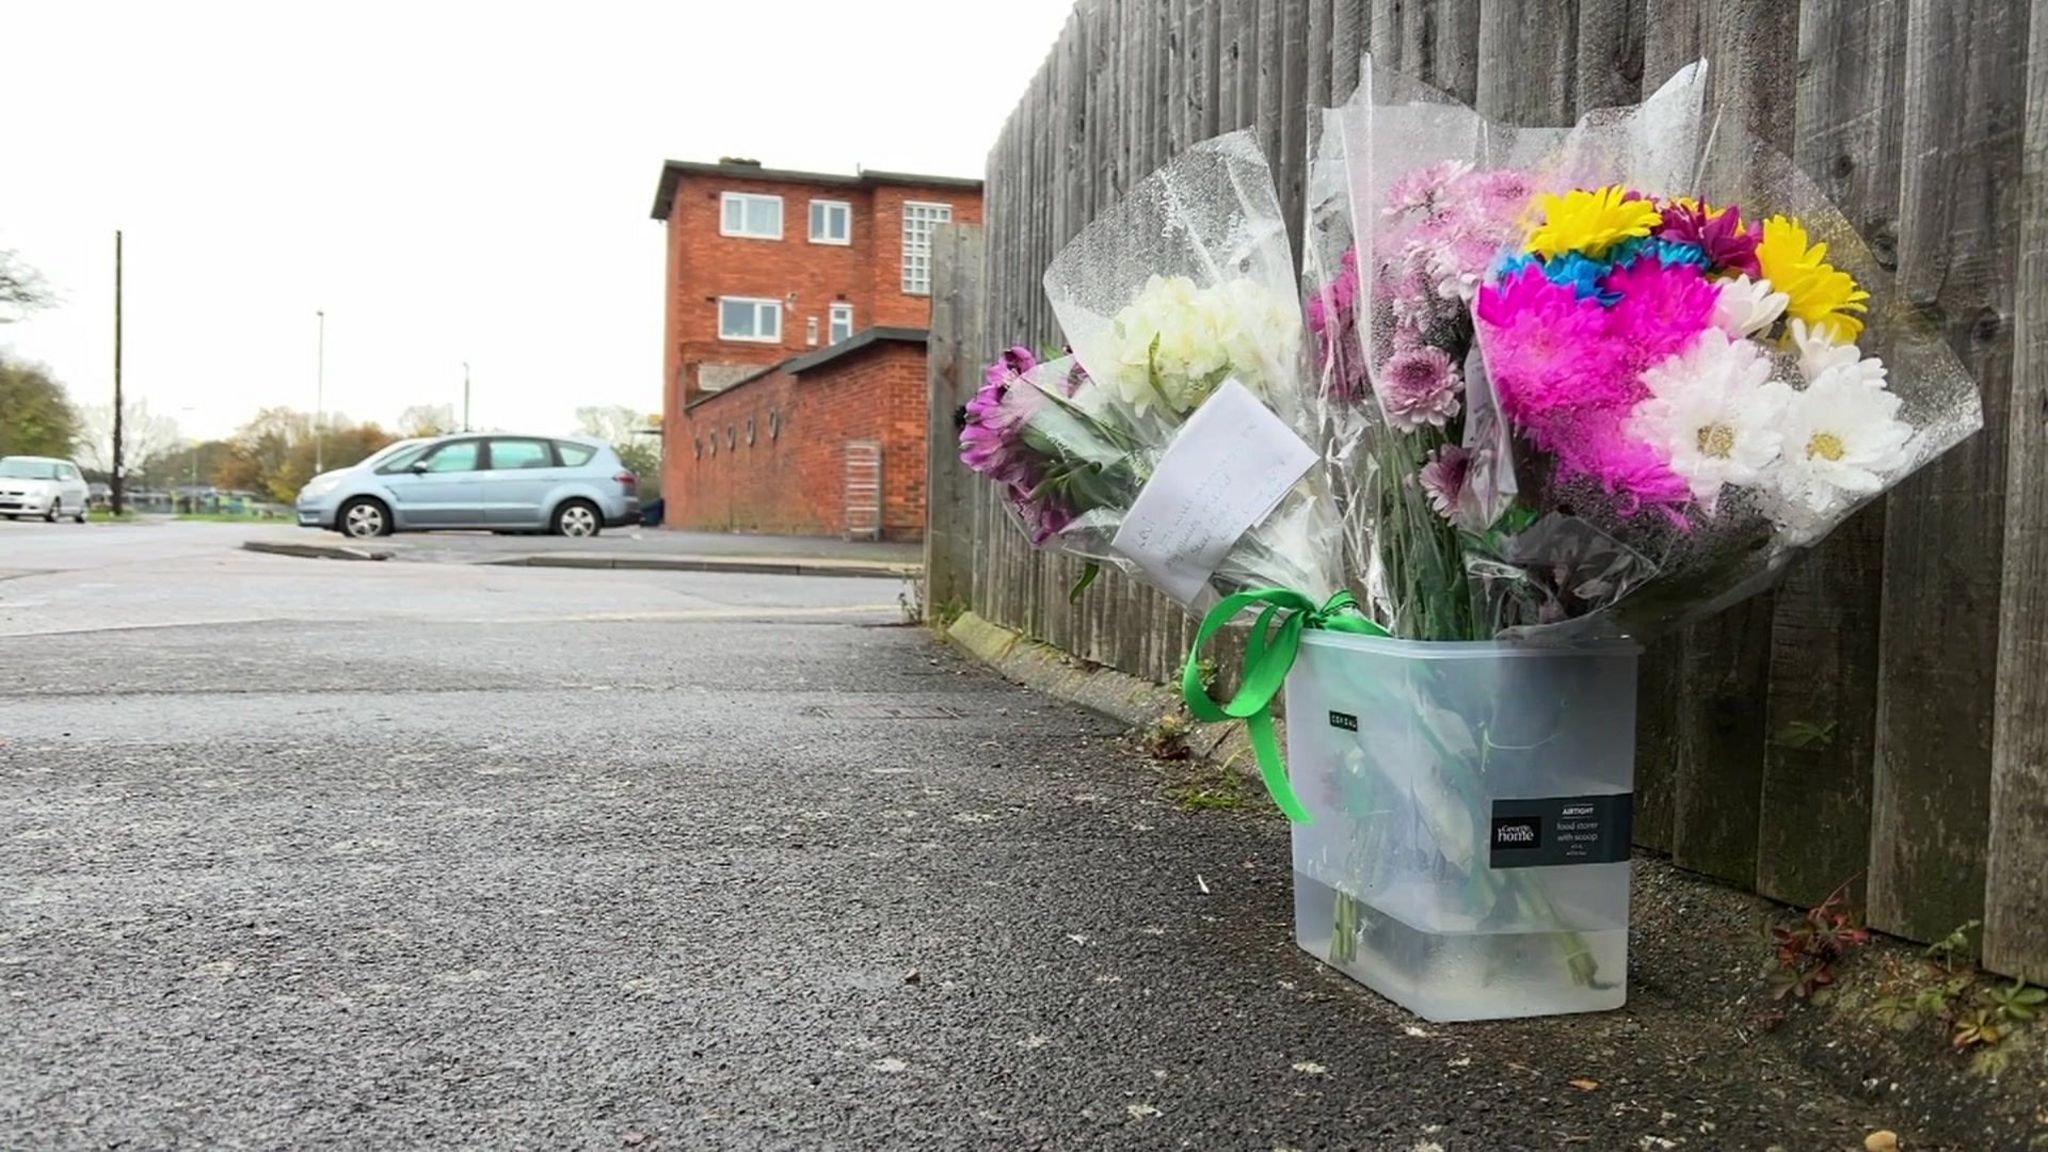 Bouquets of pink, yellow, blue and white flowers in a plastic tub filled with water and left against a fence in Keyes Road, at the spot where Levi Kent was fatally stabbed